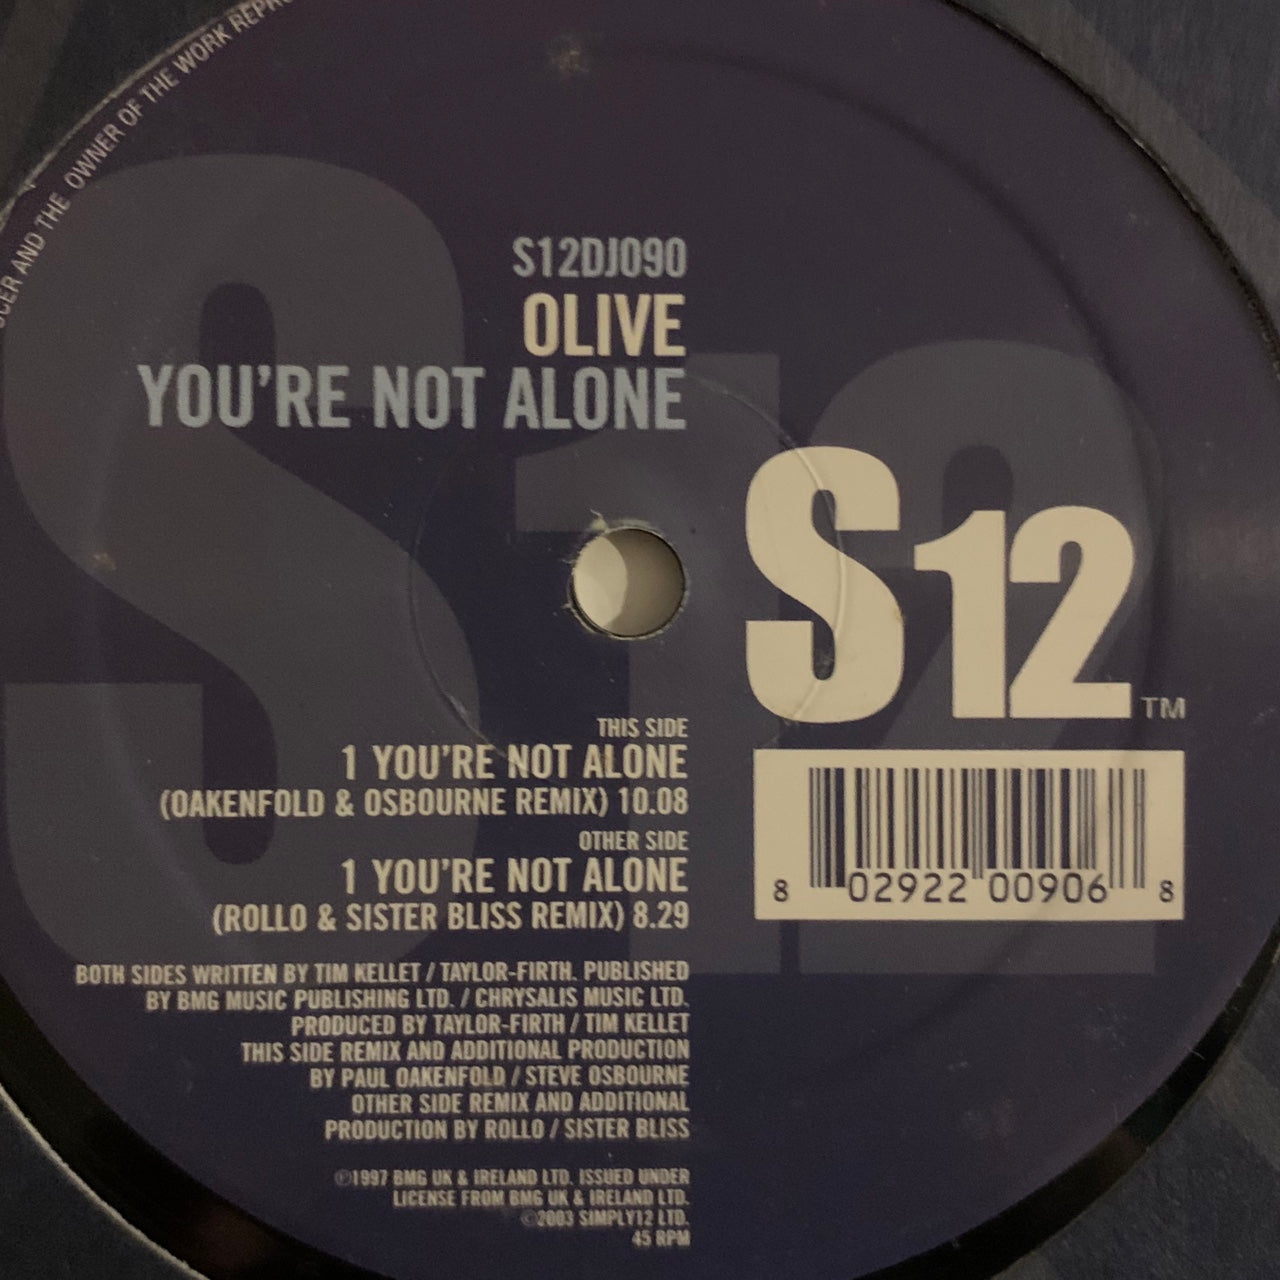 Olive “You’re Not Alone” Oakenfold and Rollo Remixes2 Version 12inch Vinyl